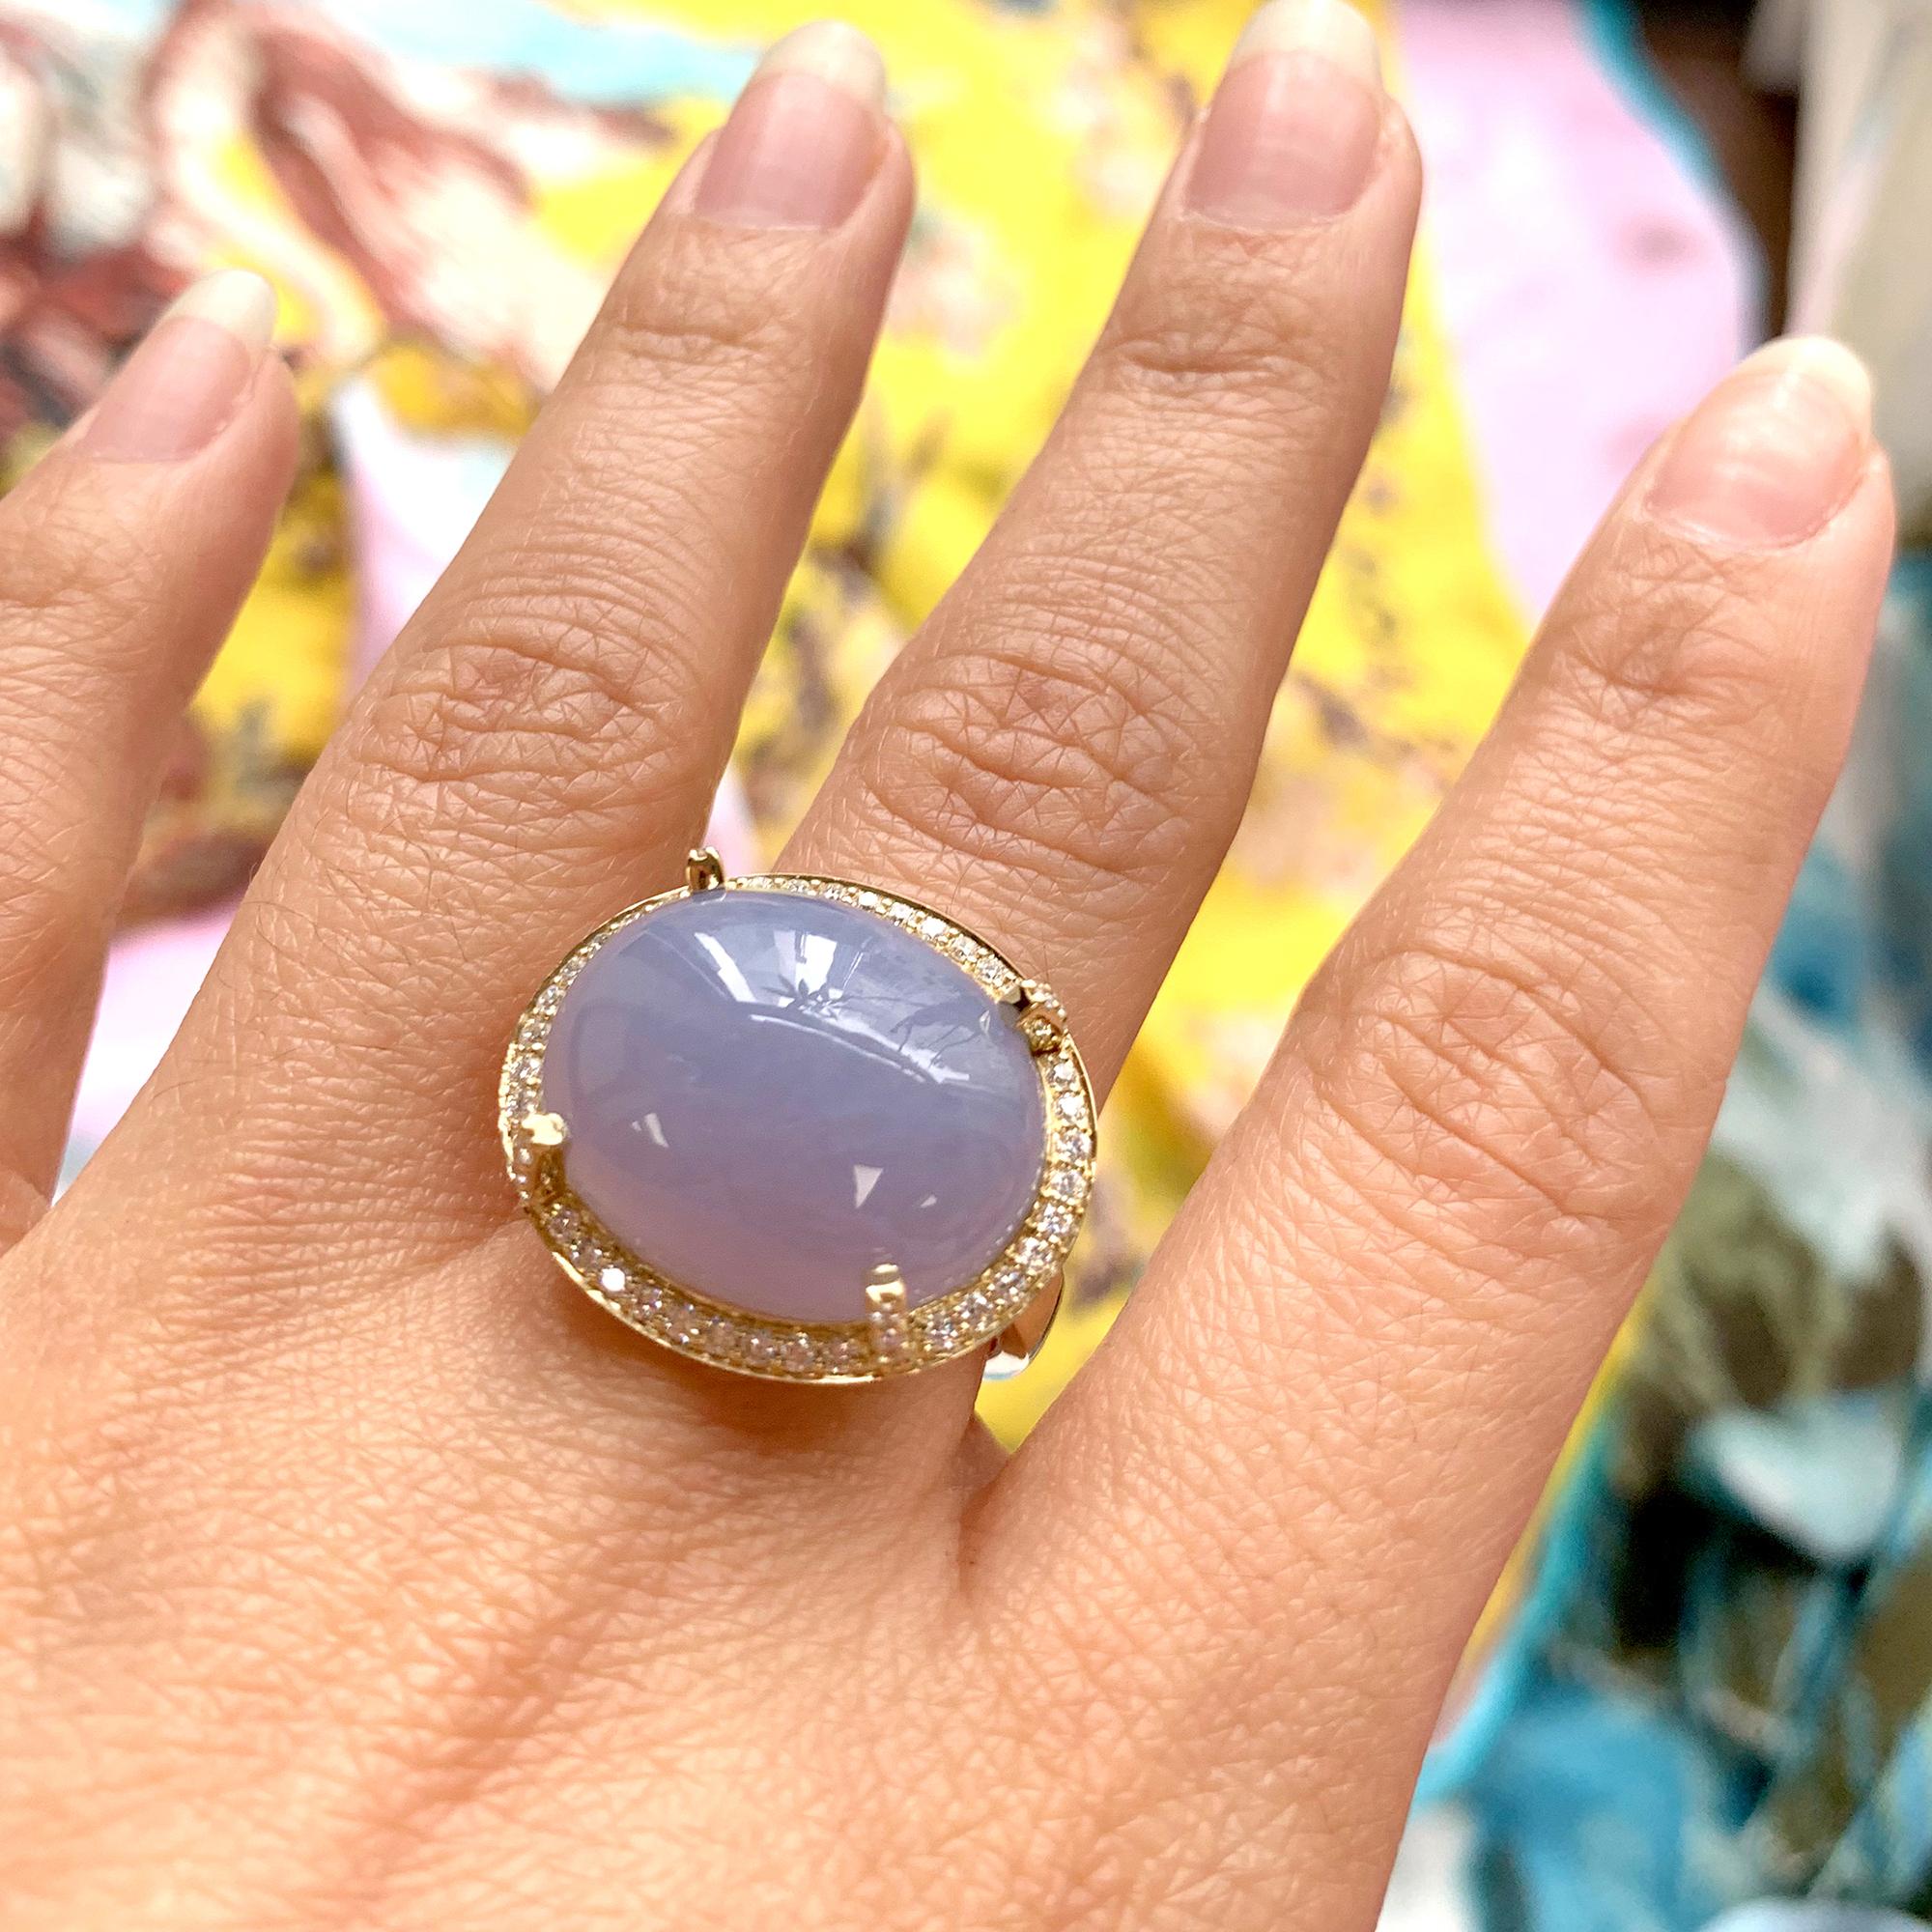 Blue Chalcedony Cabochon Ring with Diamonds in 18K Yellow Gold, from 'Rock ‘N Roll' Collection

Stone Size: 19 x 16 mm

Diamonds: G-H / VS, Approx. Wt.: 0.42 Cts
